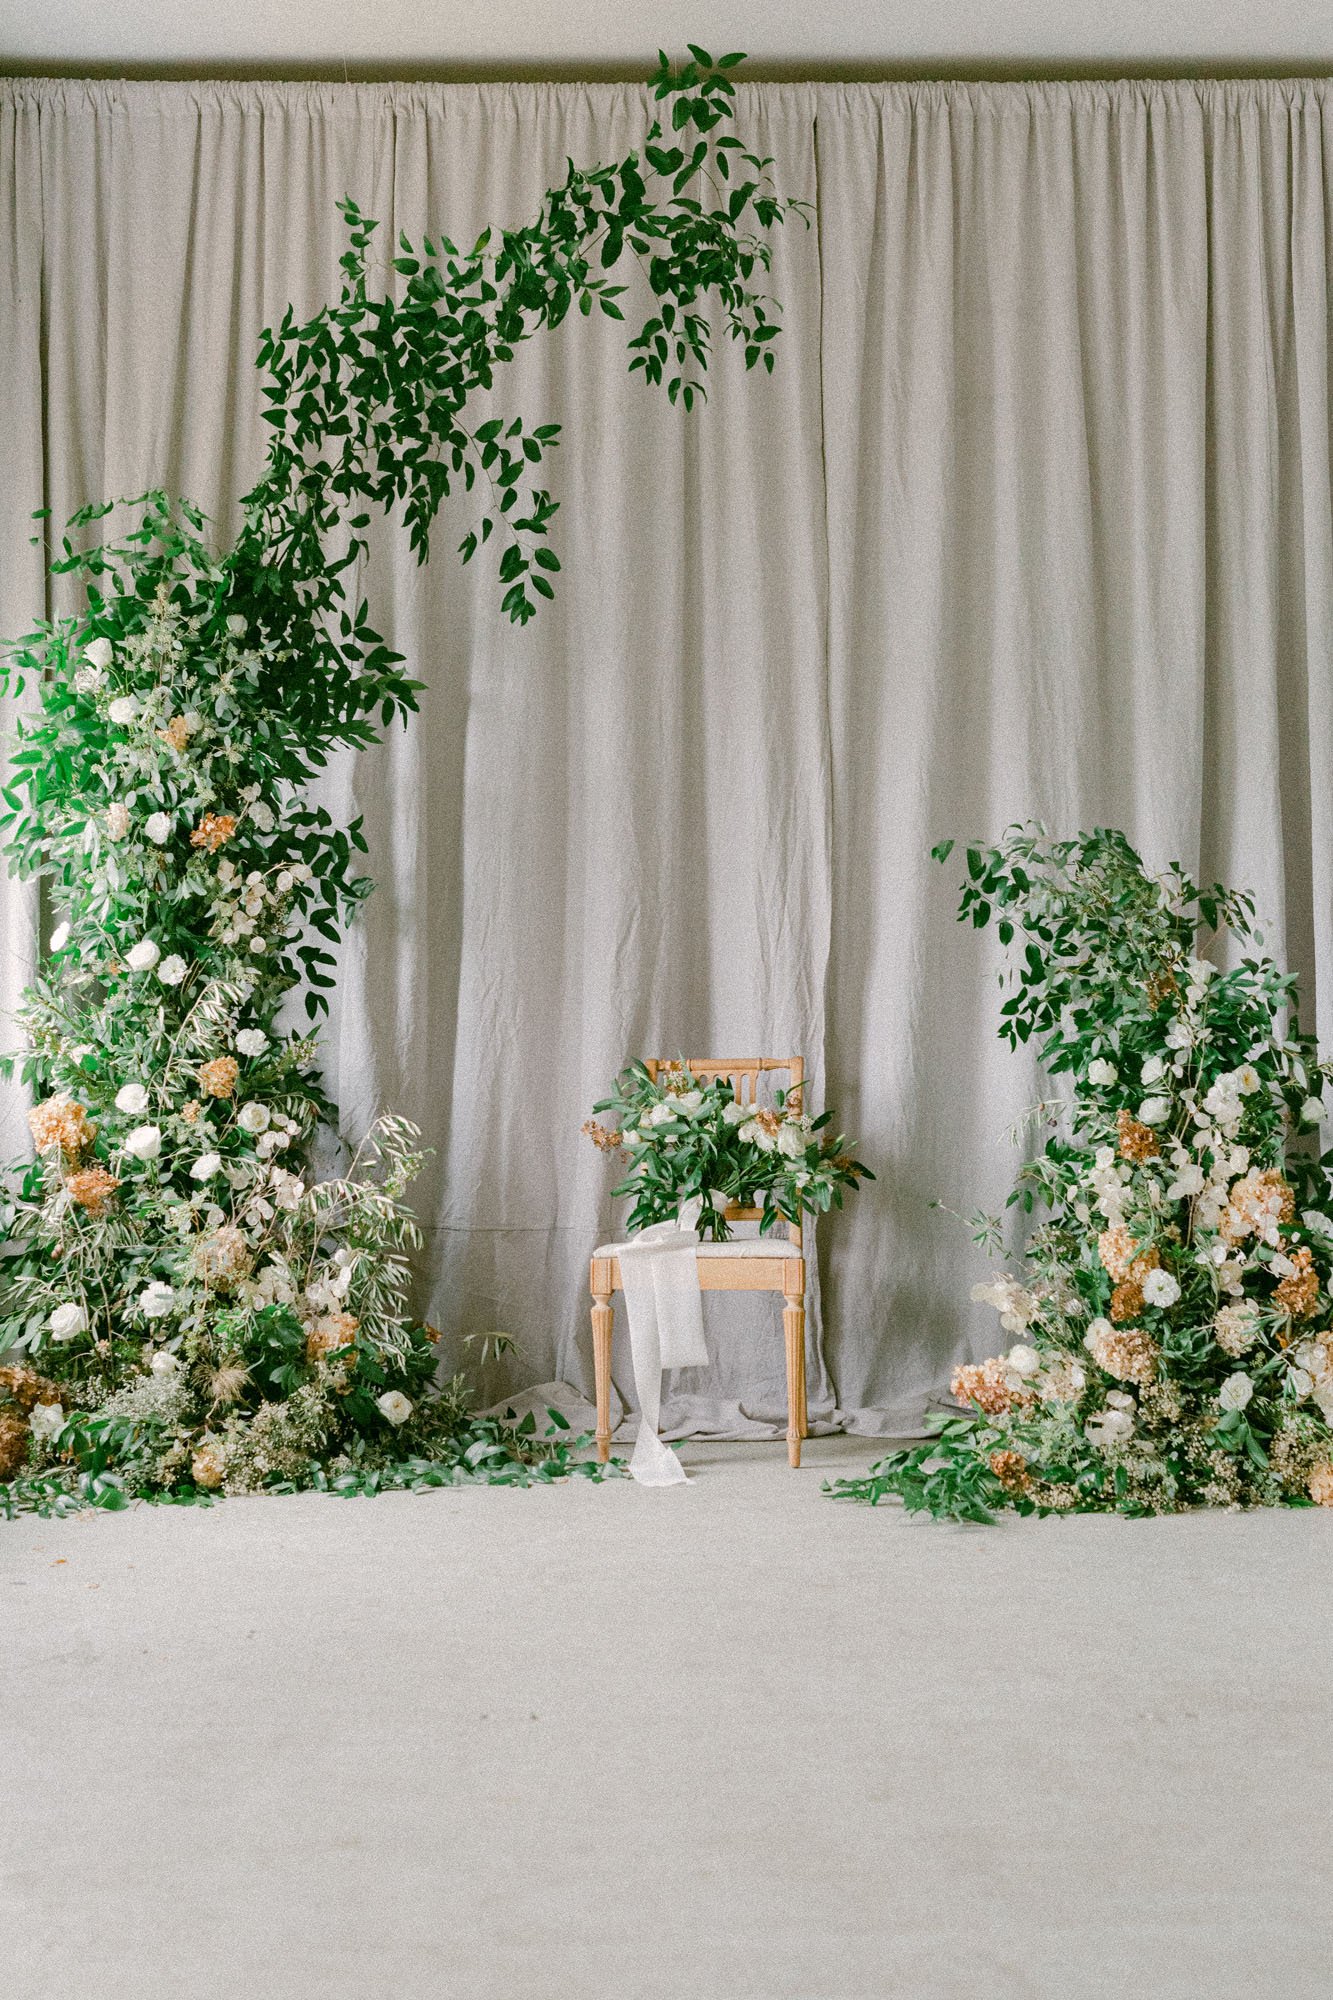  a wild and organic wedding arbor installation with lovely greenery, dried florals, and large white blooms in front of a grey linen backdrop 